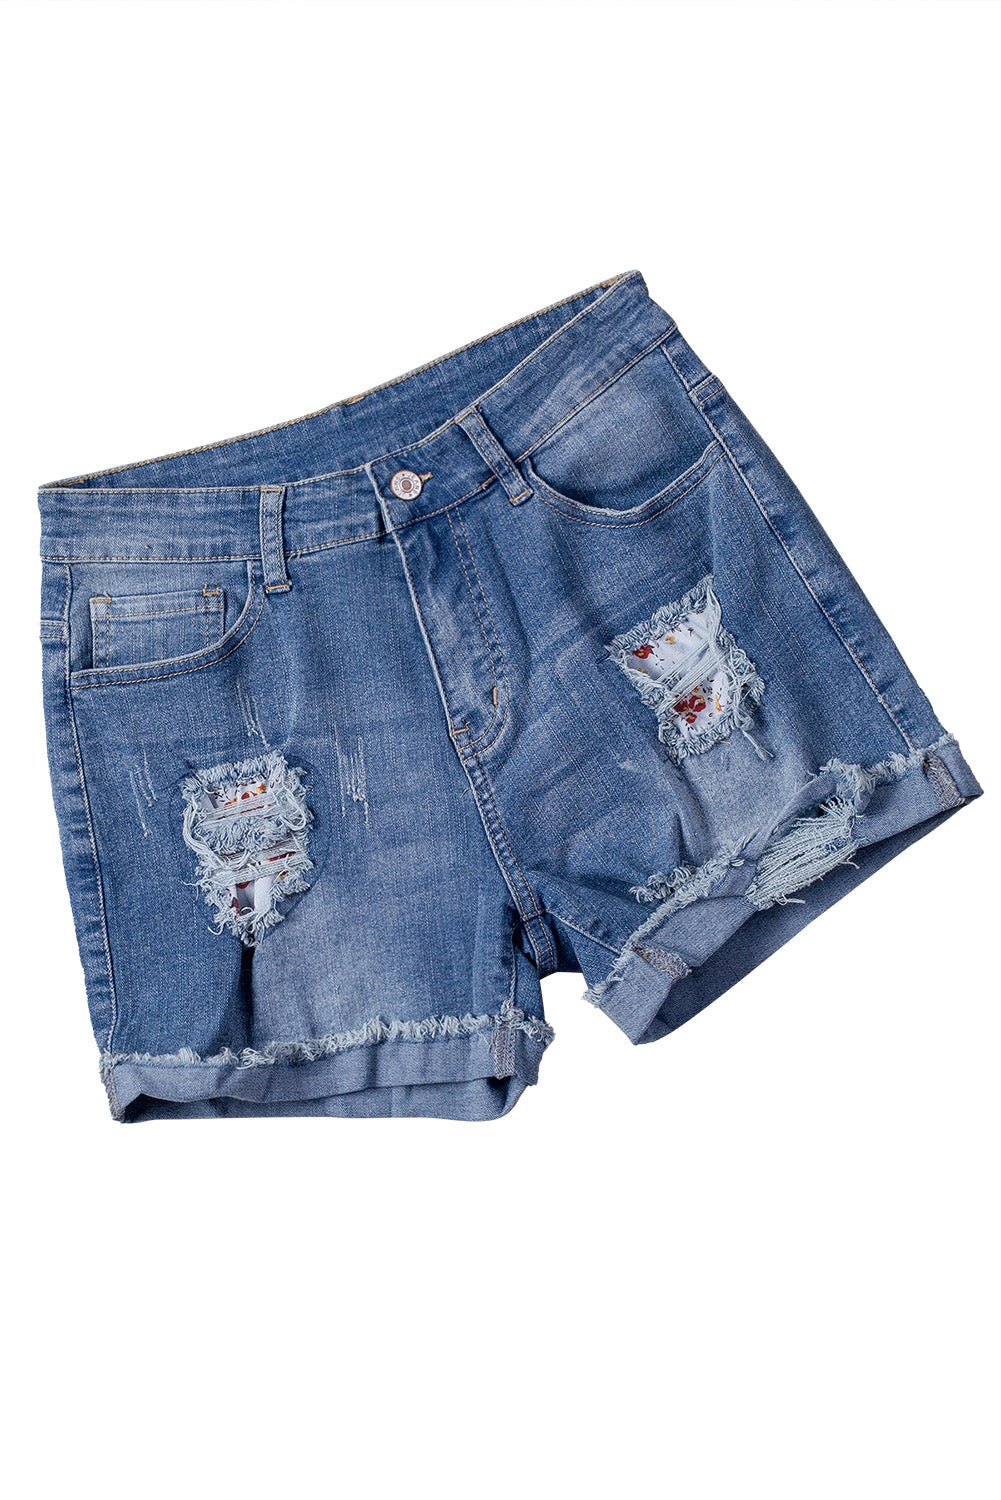 LC78823-1-S, LC78823-1-M, LC78823-1-L, LC78823-1-XL, LC78823-1-2XL, White Ripped Patchwork Hem Denim Shorts for Women